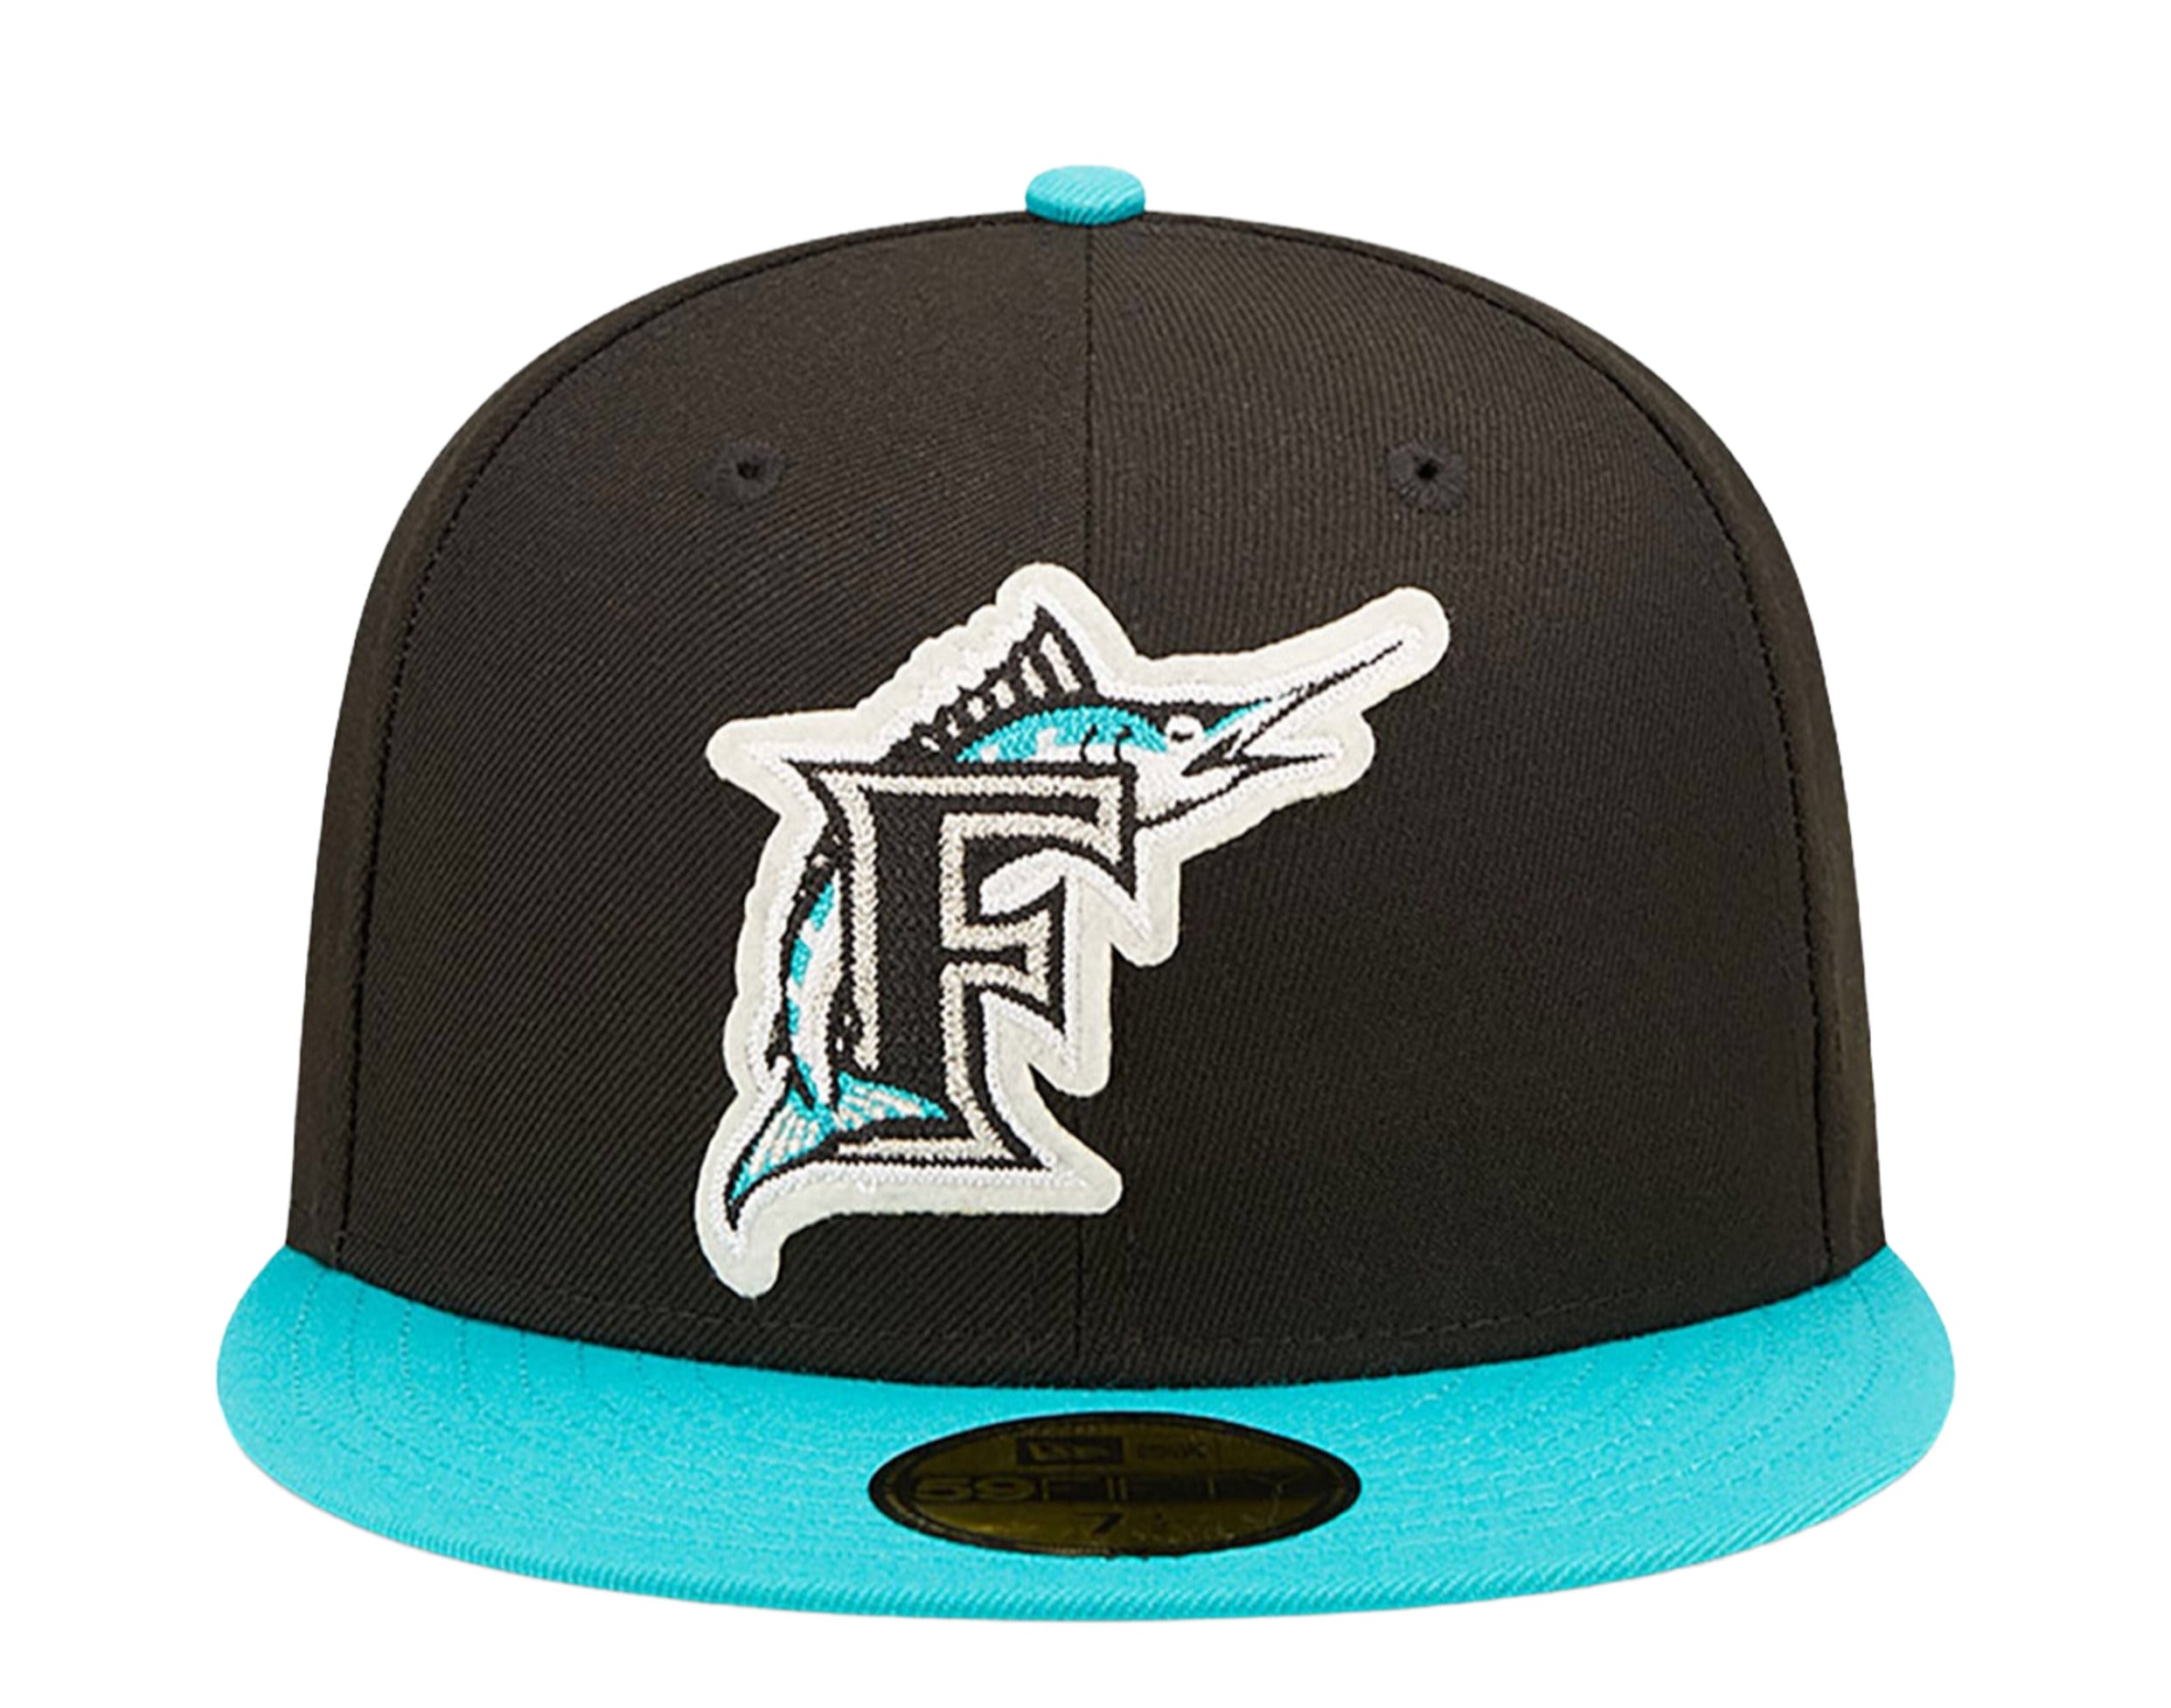 Florida Marlins Vintage New Era 59FIFTY Diamond Fitted Cap Hat